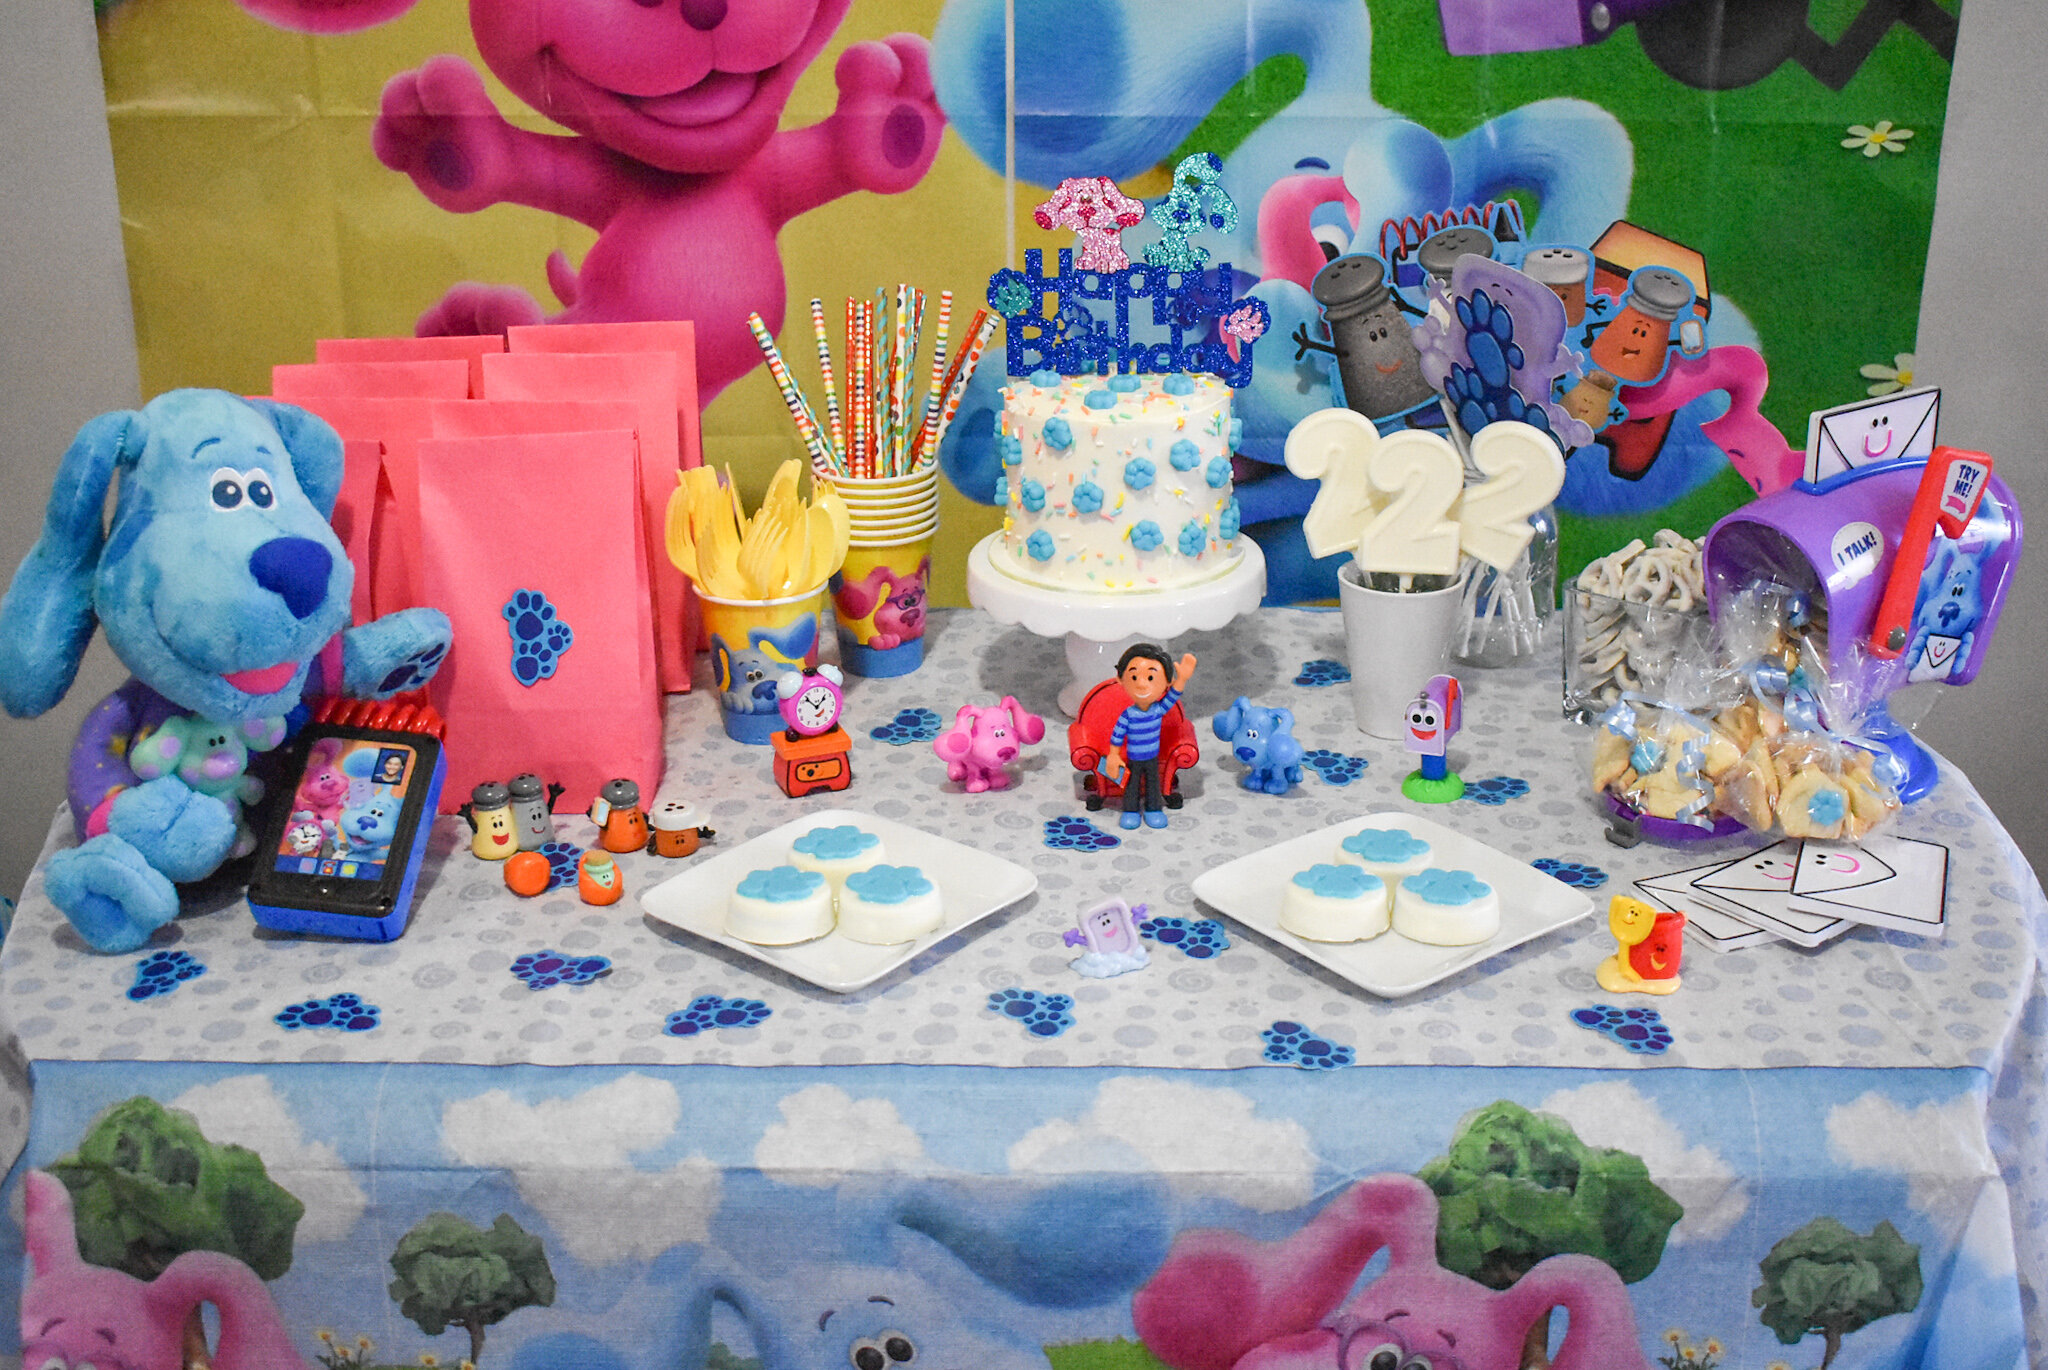 Budget-Friendly Blue's Clues Party Ideas for a Blue's Clues & You Birthday